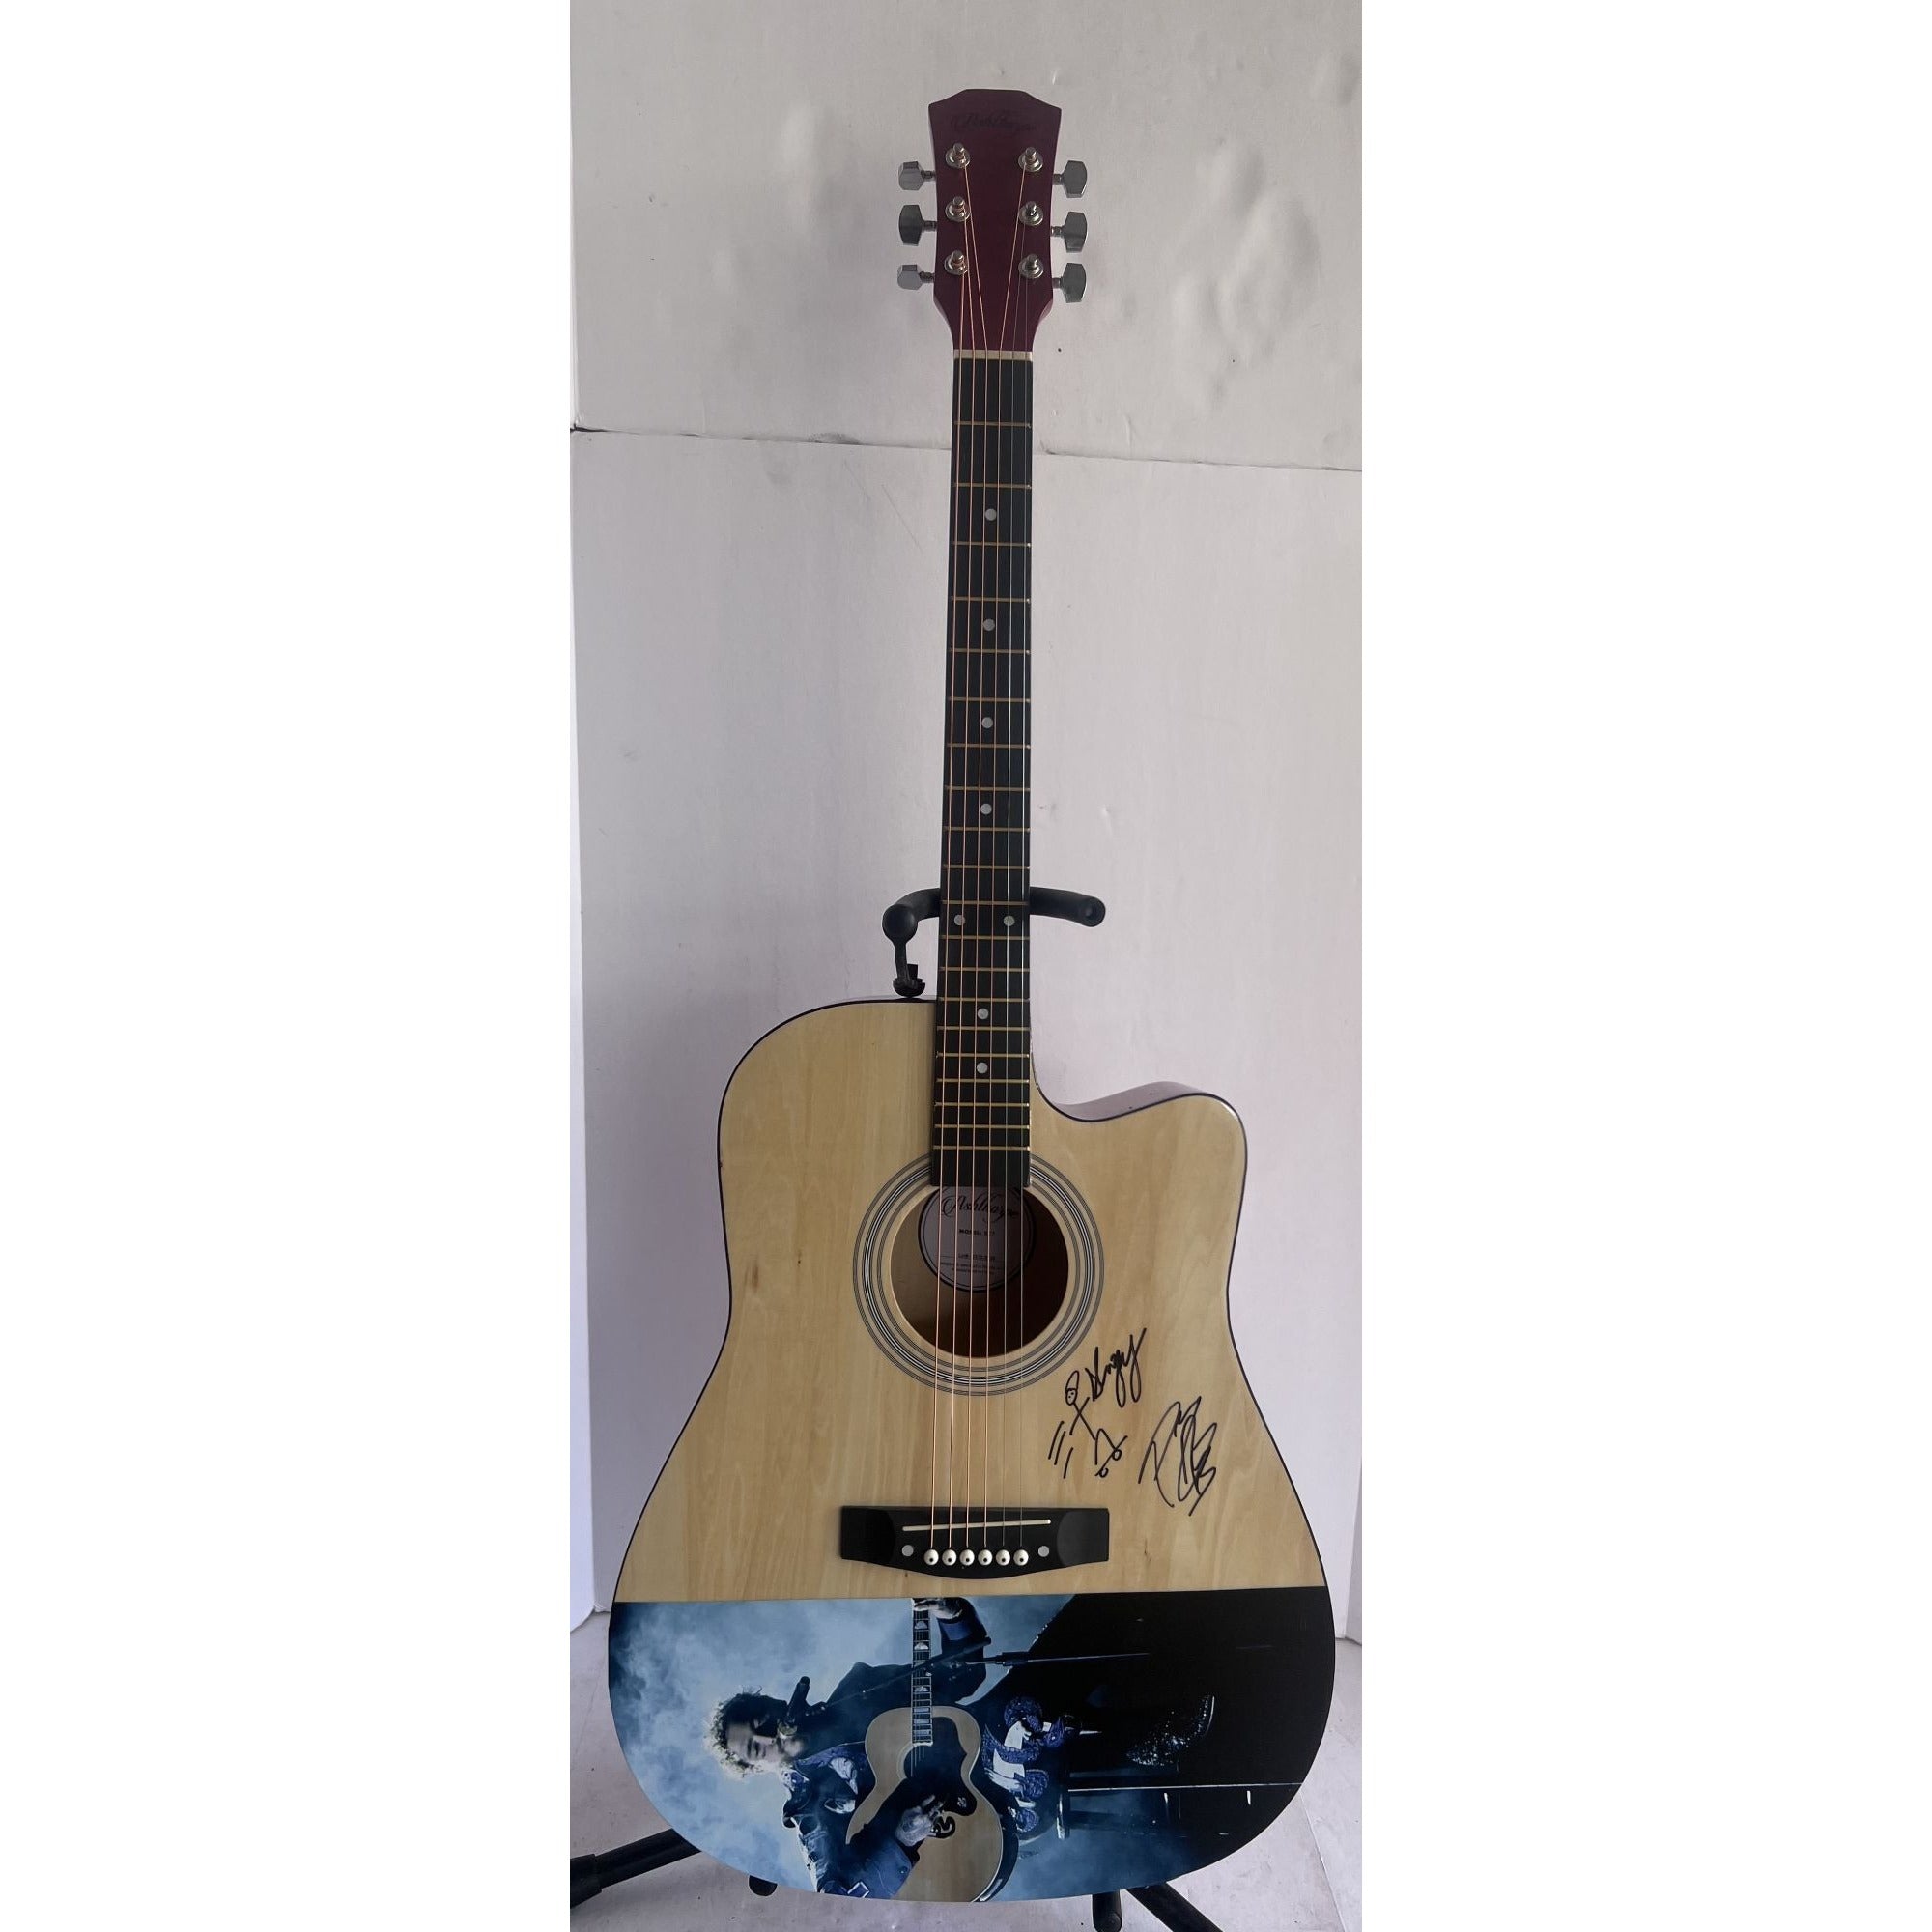 Post Malone" Austin Richard Post signed and sketched one of a kind full size acoustic guitar signed with proof